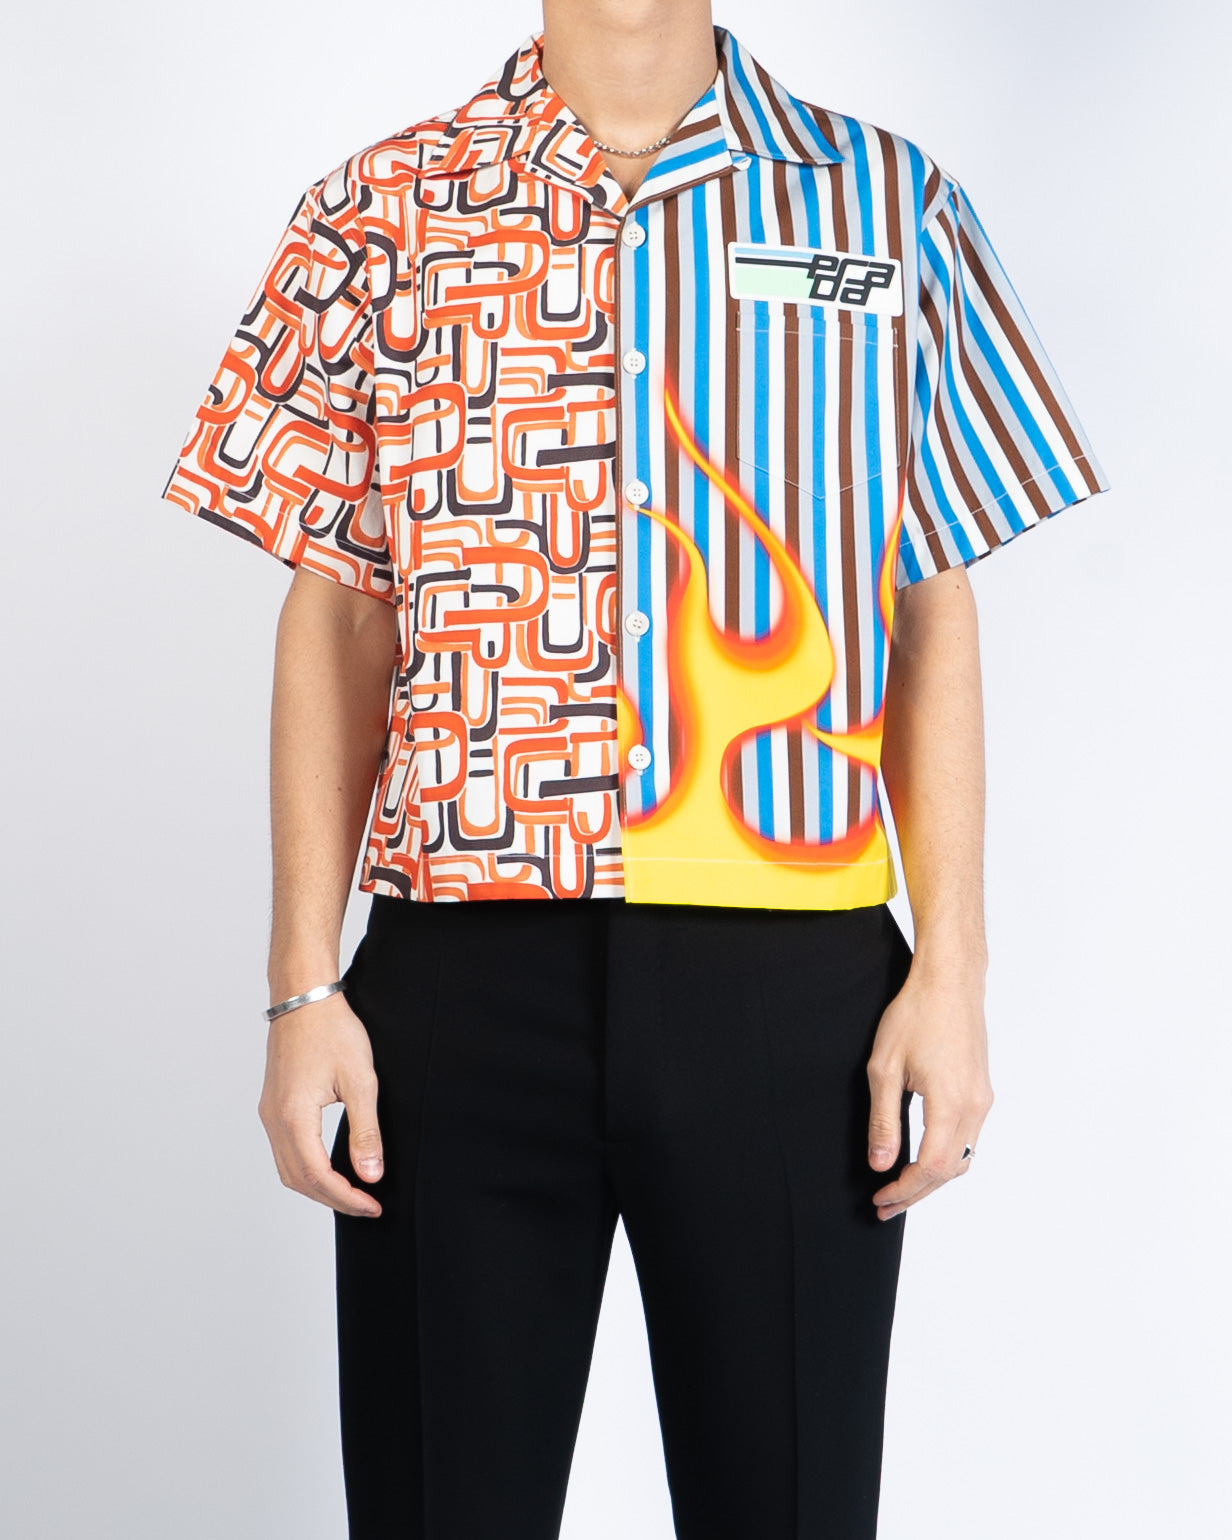 FW18 Double Match Flame Shirt